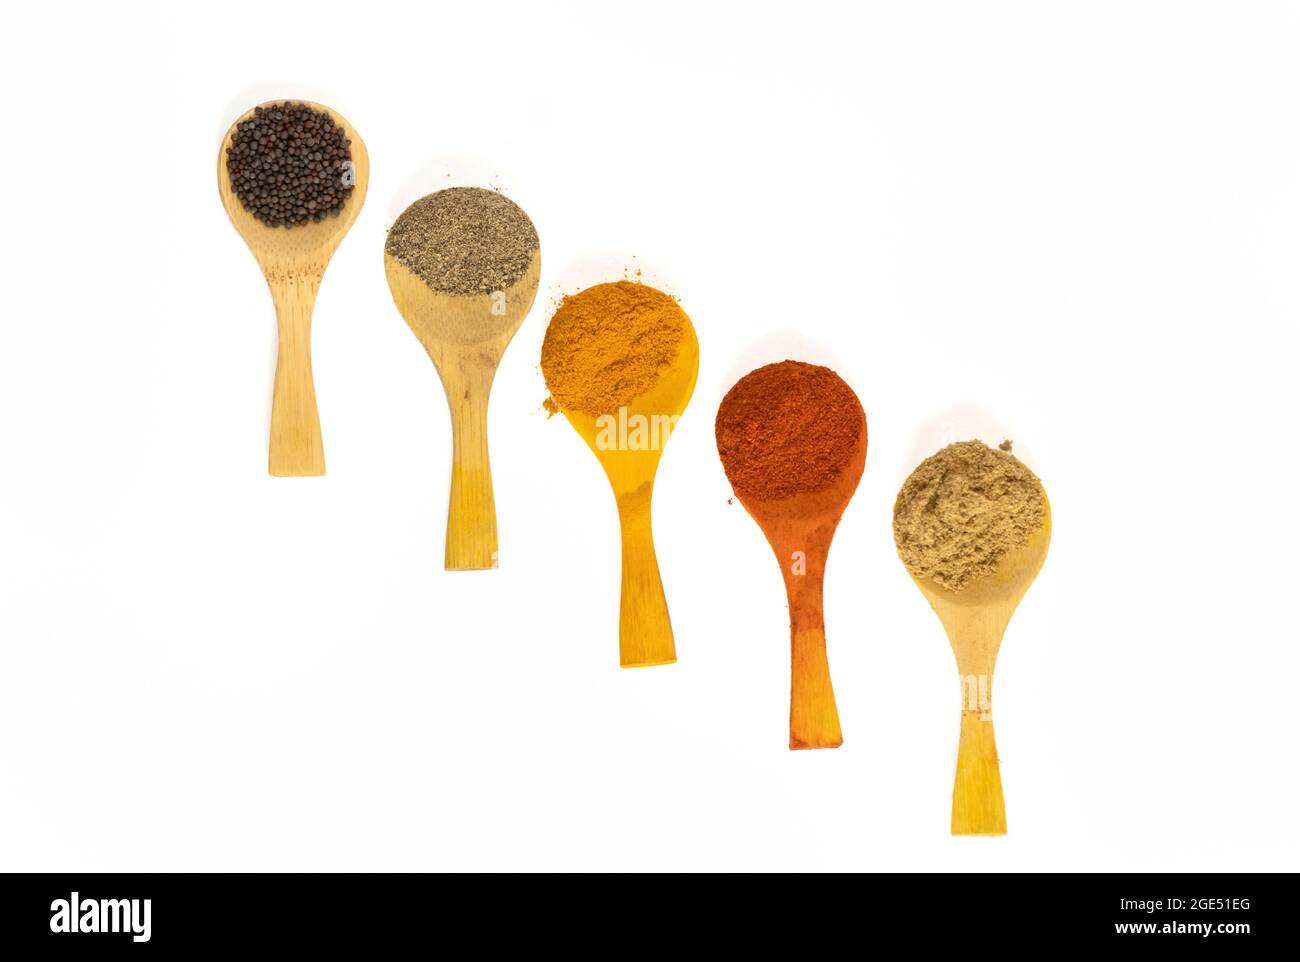 Indian Spicy Masala Powders In Wooden Spoon, White Background. Selective Focus Stock Photo